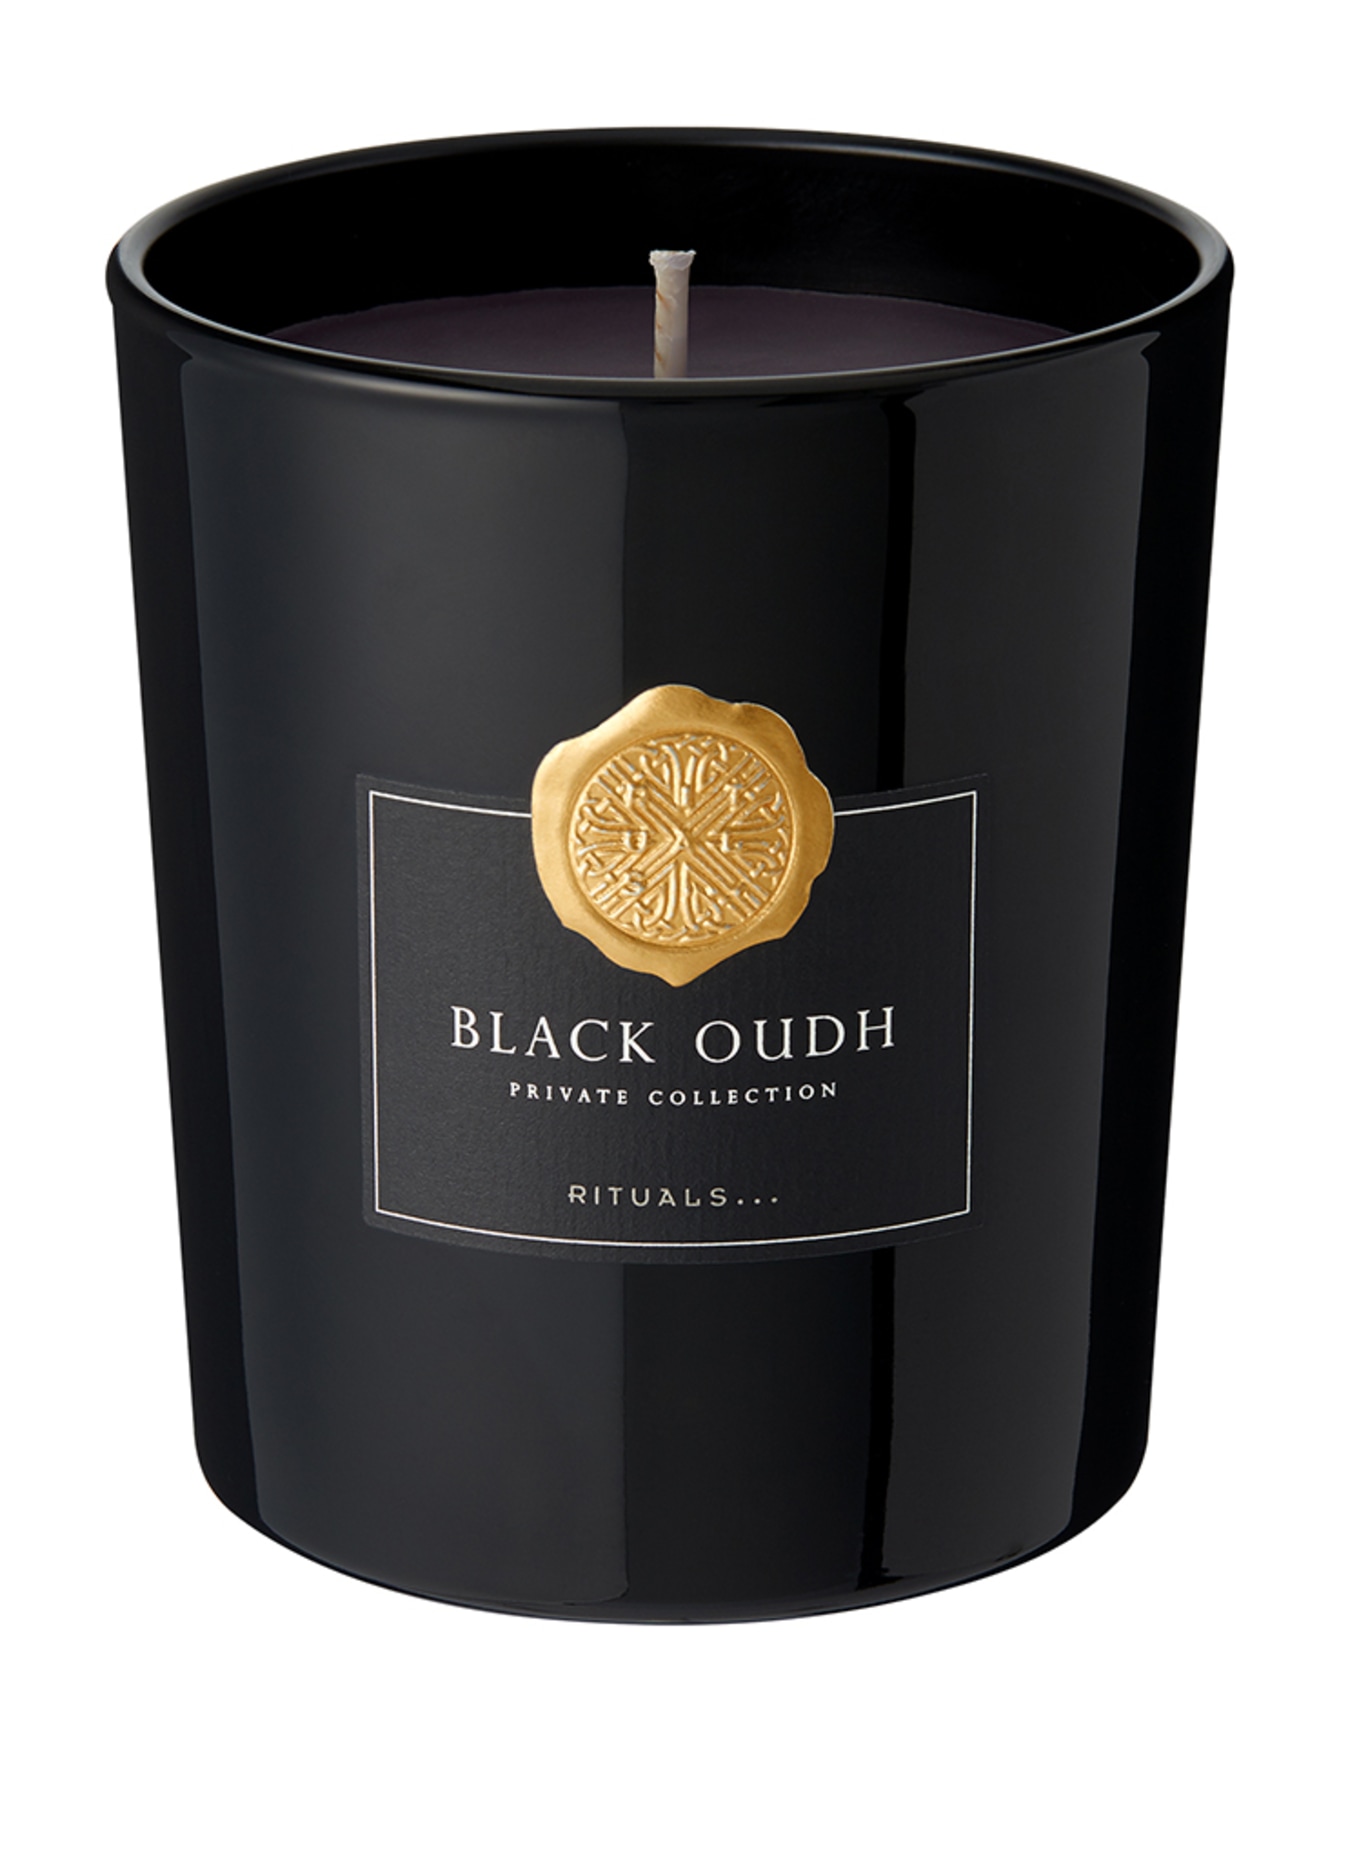 RITUALS BLACK OUDH SCENTED CANDLE (Obrázek 1)